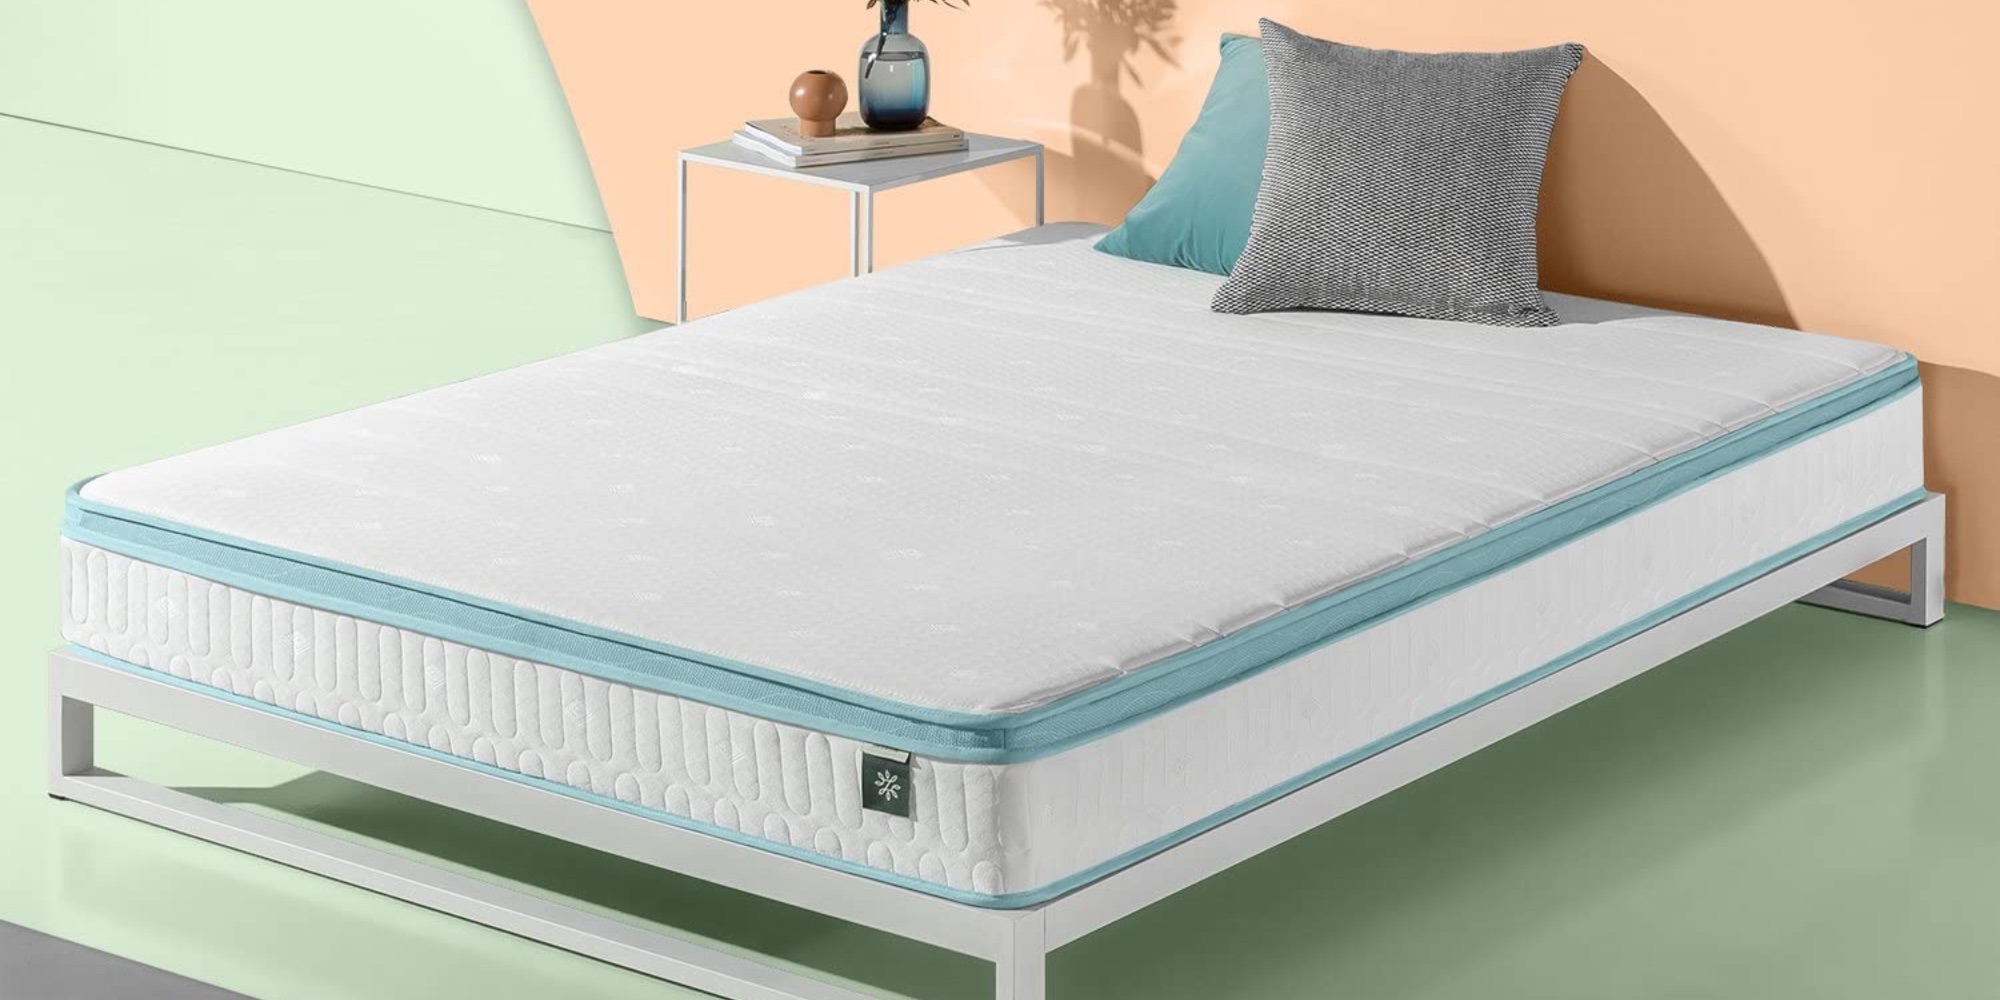 zinus pocketed spring 8 inch classic mattress king